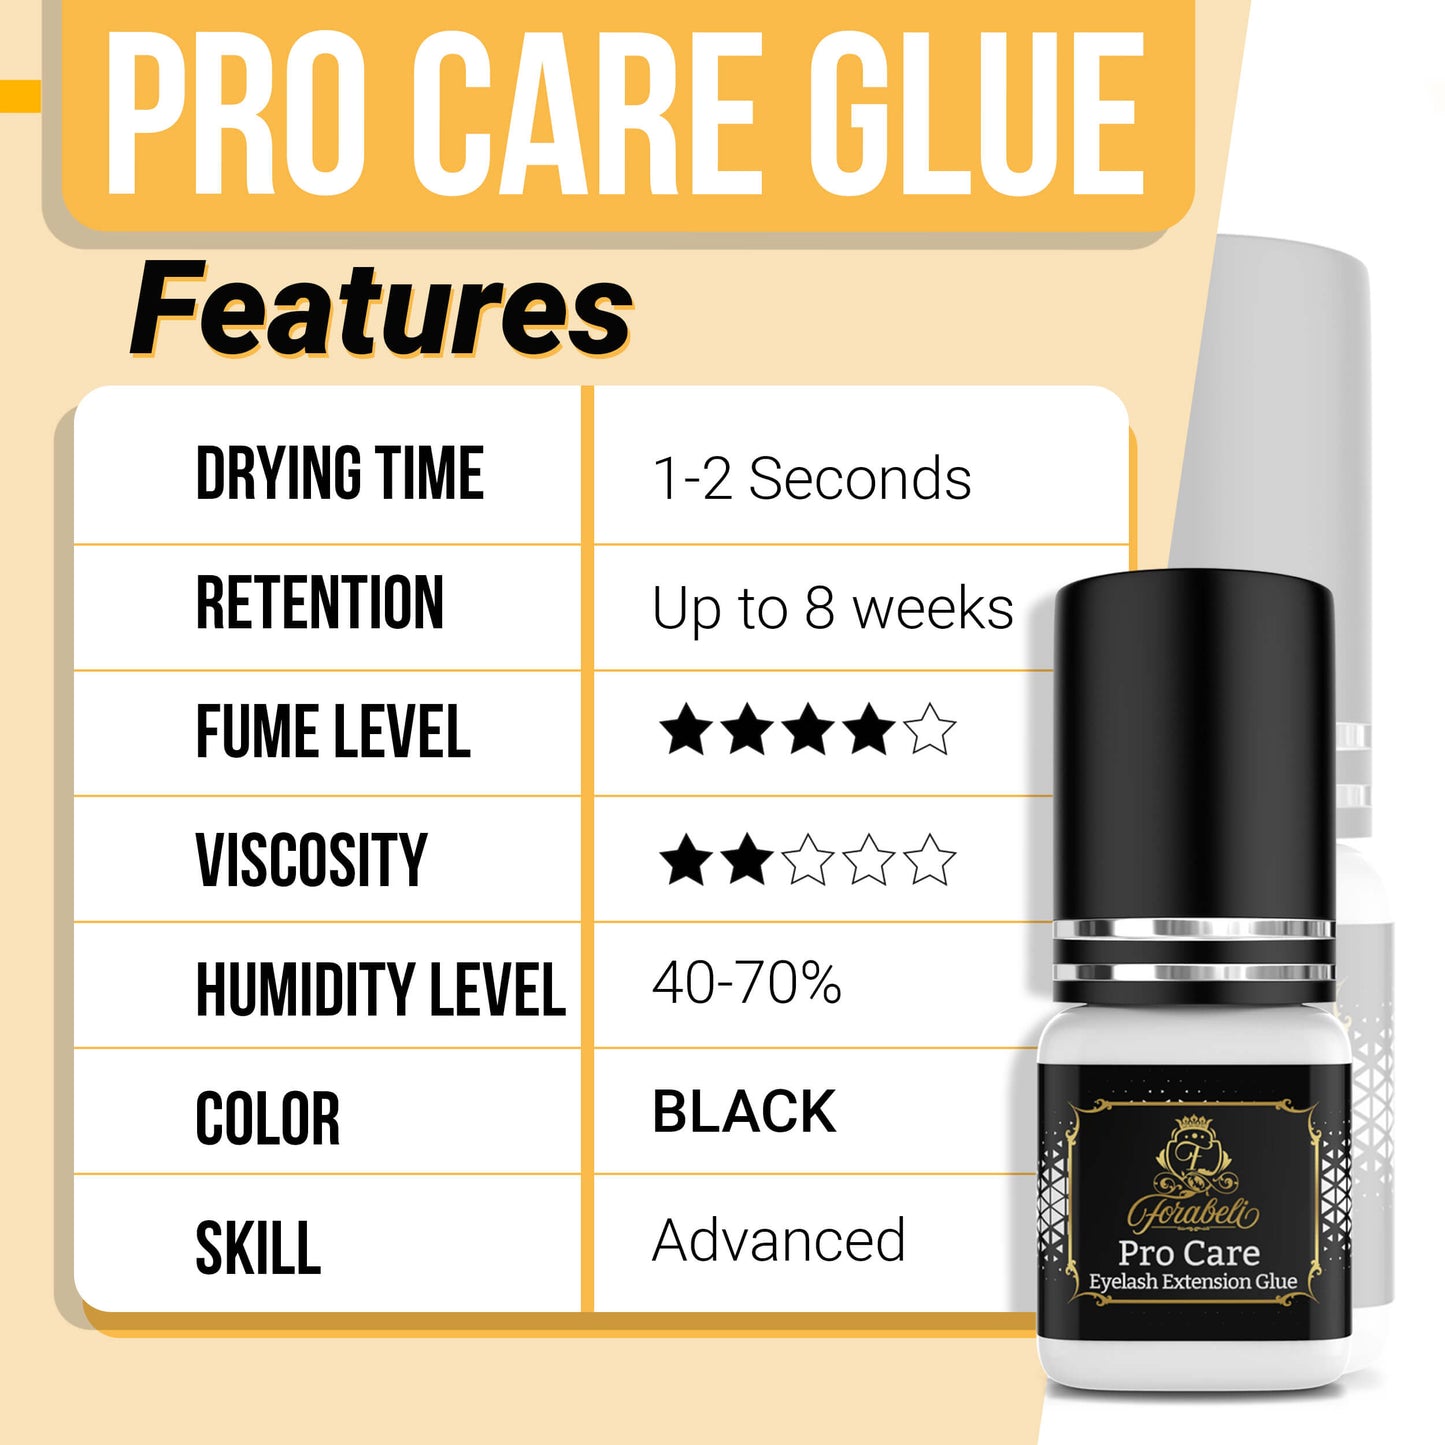 Procare eyelash extension glue with a drying time of 1-2 seconds, remarkable retention lasting up to 8 weeks. Features moderate fume levels, thin viscosity for a natural look, and is ideal for 40-70% relative humidity and 70-74°F (21-23°C). Classic black color, designed for certified lash technicians, water & sweat-resistant formula. Latex, cruelty, and formaldehyde-free.